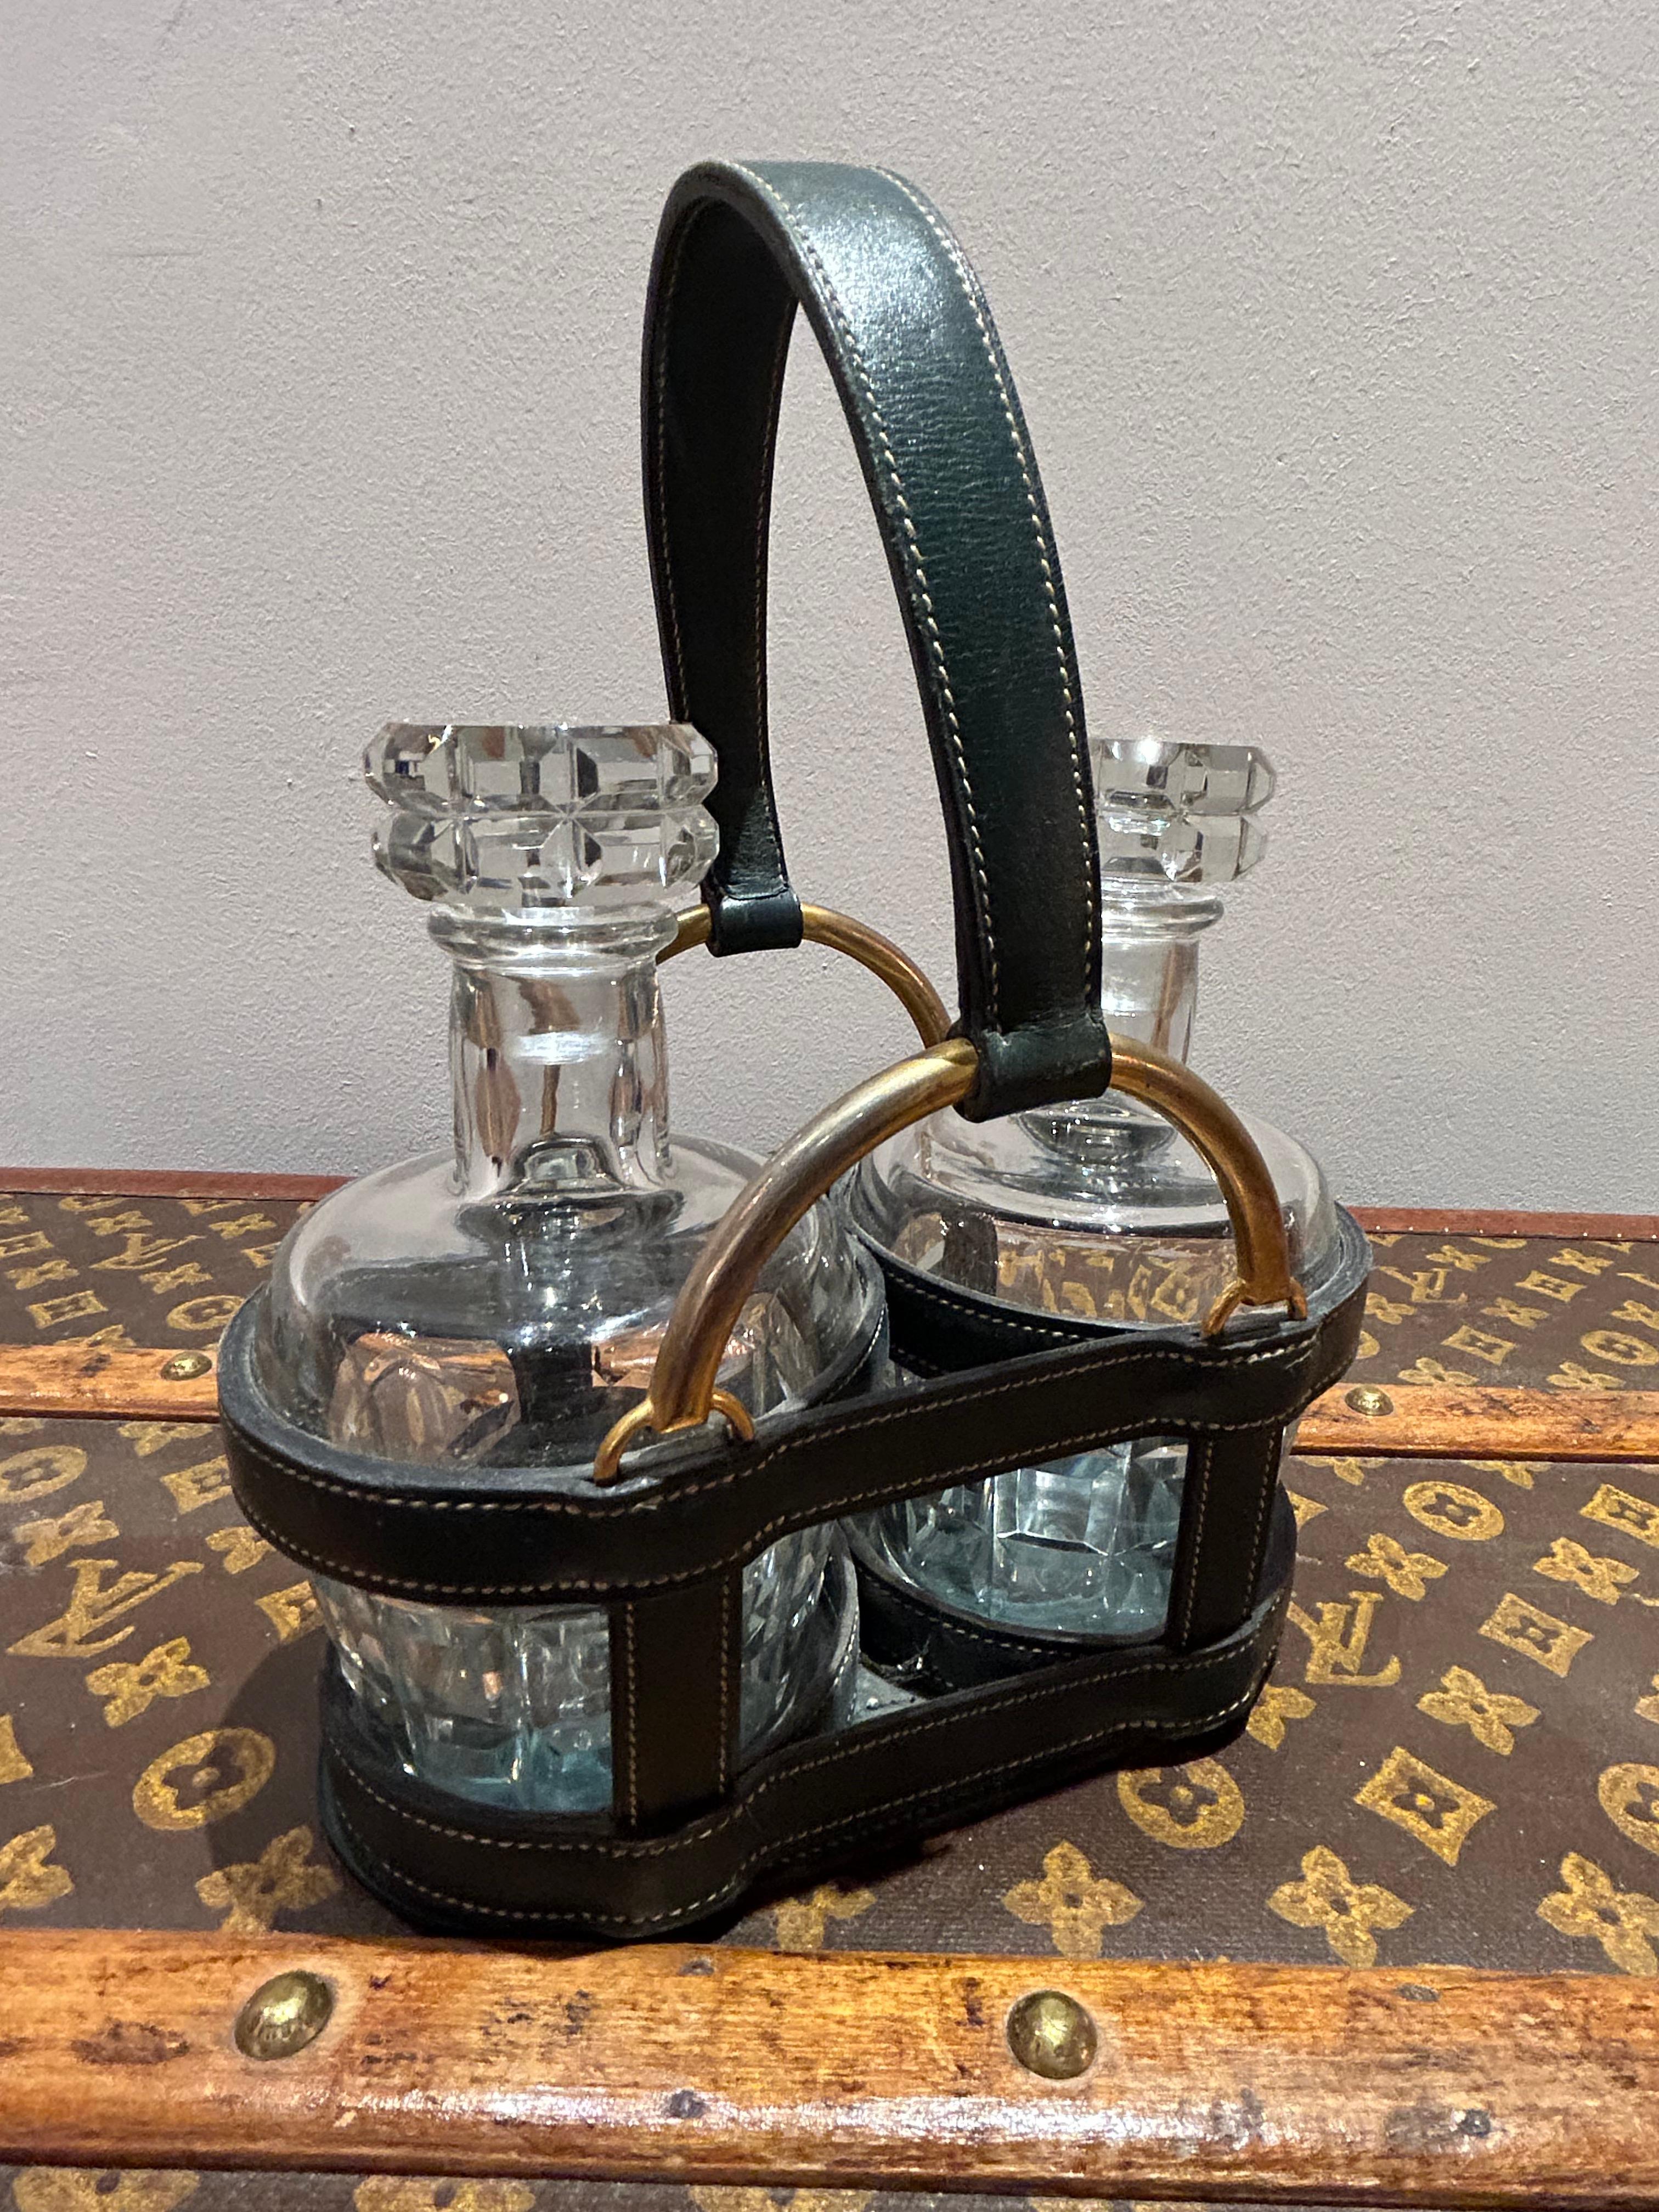 Beautiful 1950's Dual Decanter Hermès Holder, including two crystal decanter together in a green leather stitched Hermes look a like basket.

Dimensions: Height 25cm, width 20cm, depth 11cm 

Condition: Please view the very detailed pictures as they